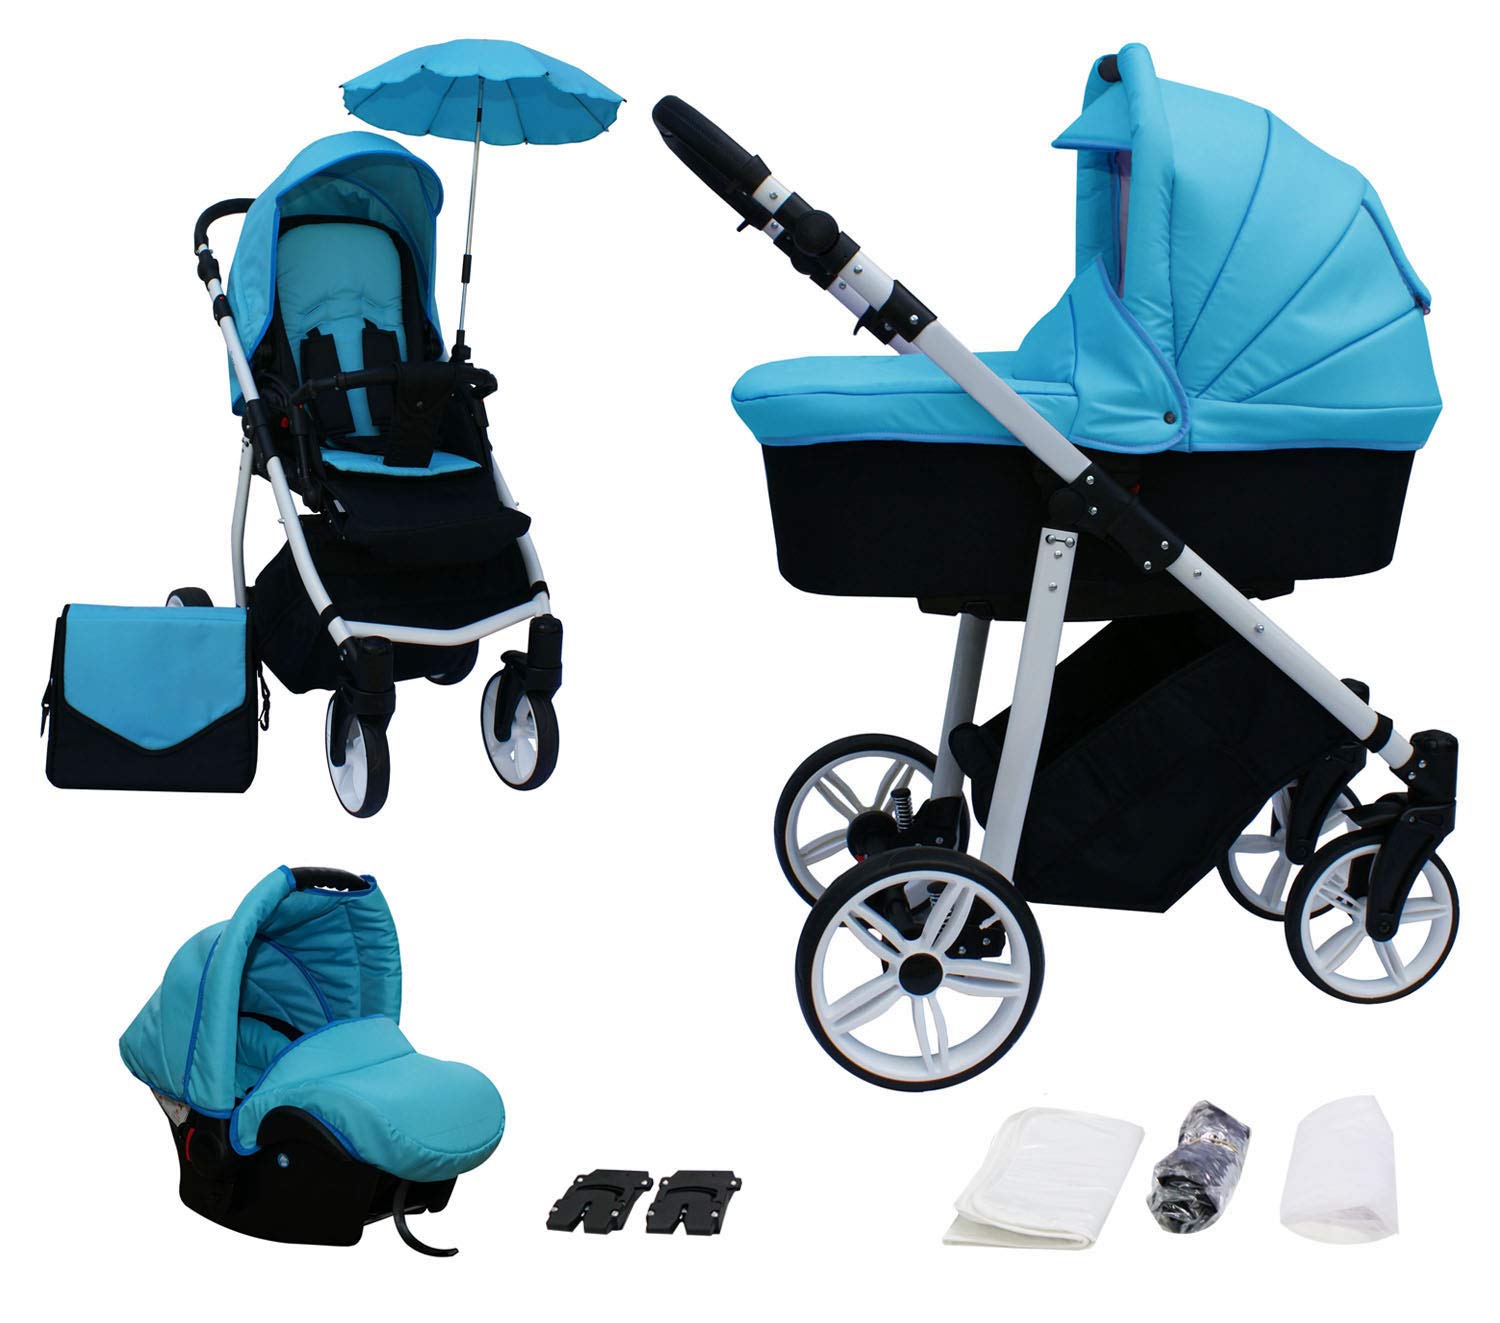 Skyline 3-in-1 Combination Pram with Aluminium Frame, Carrycot, Sports Buggy Attachment and Baby Car Seat (Isofix)